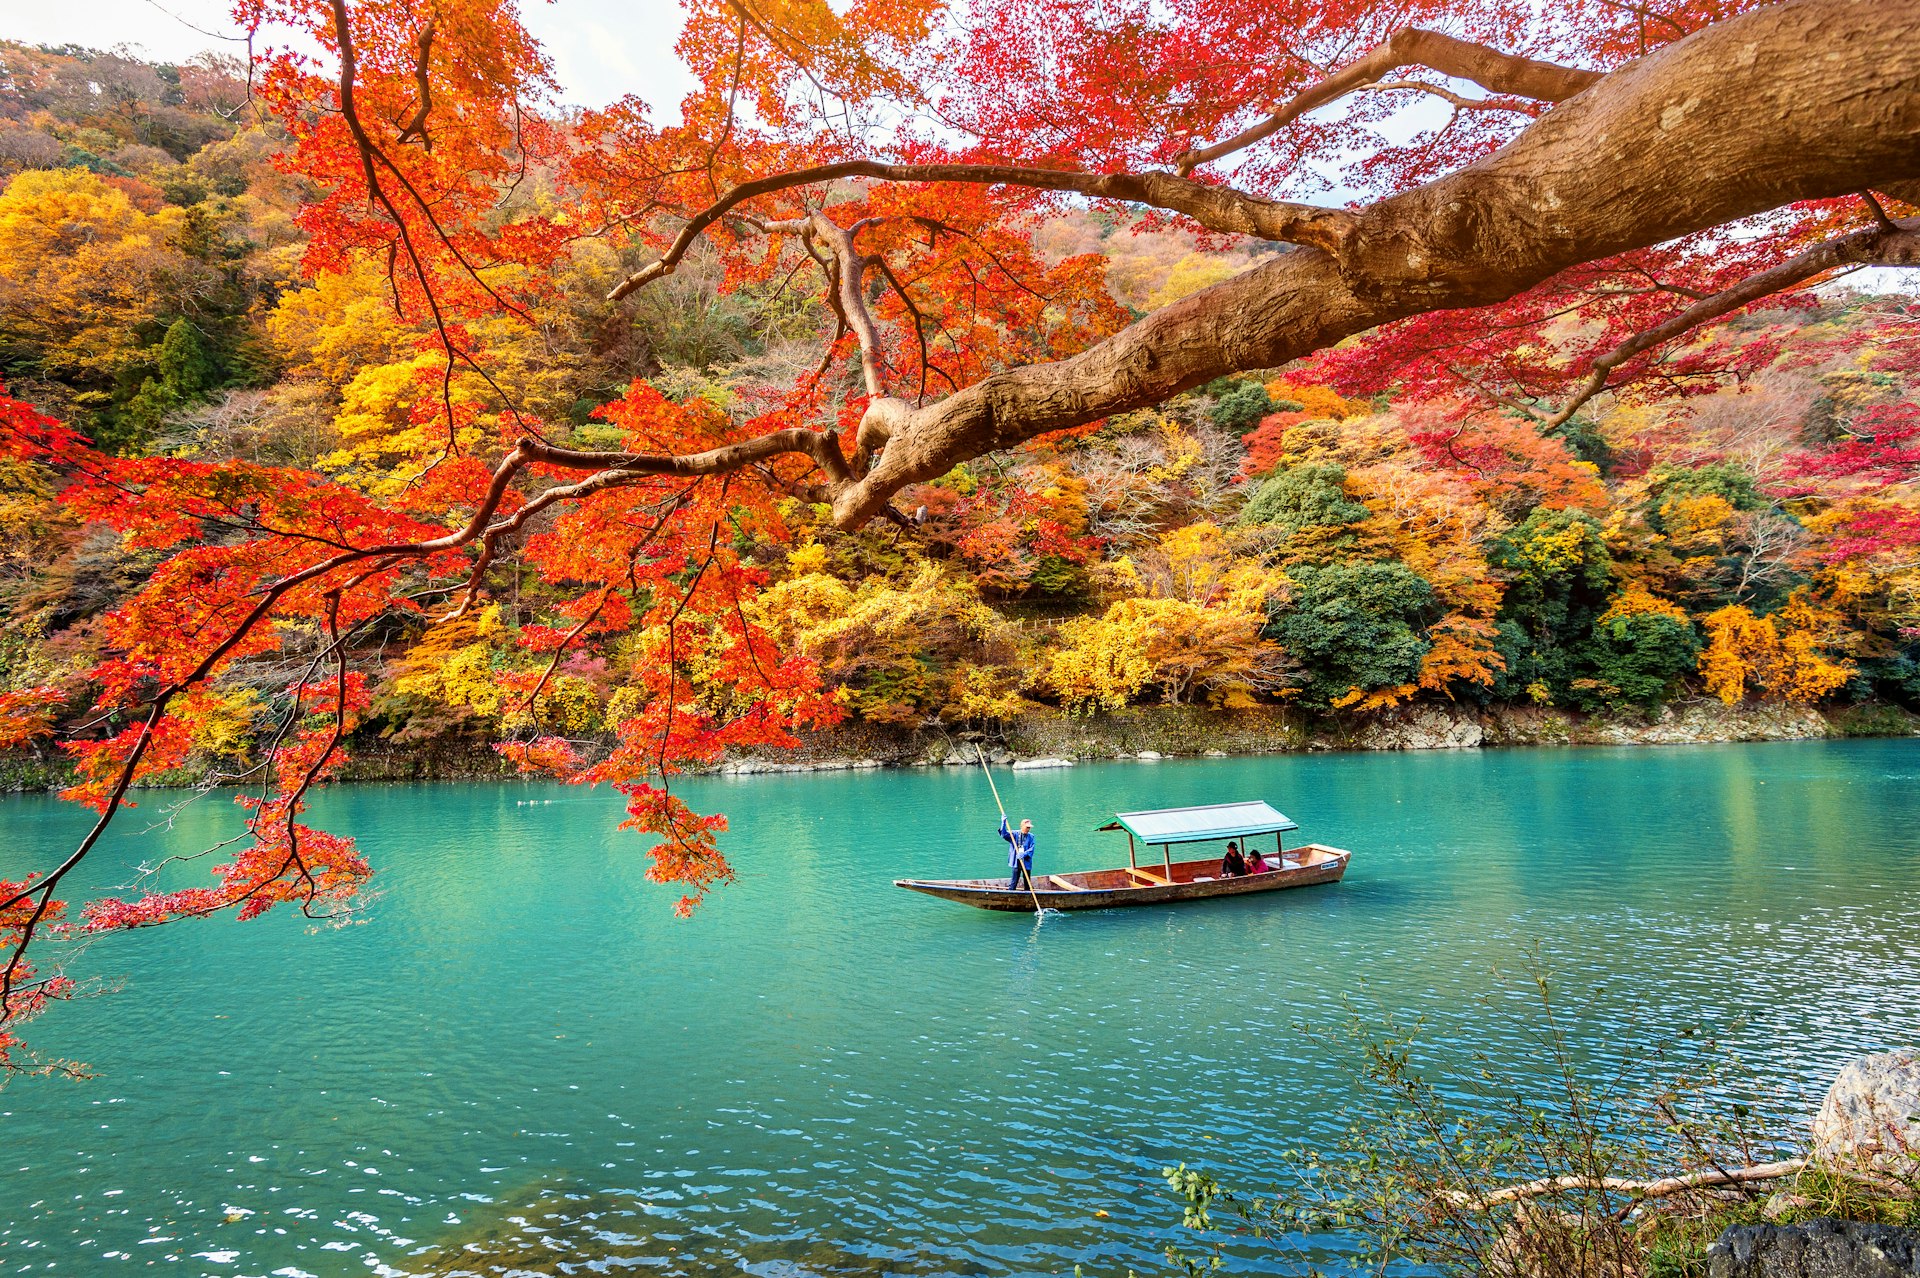 Boatman punting along a river that's surrounded by fall foliage on the outskirts of Kyoto, Japan